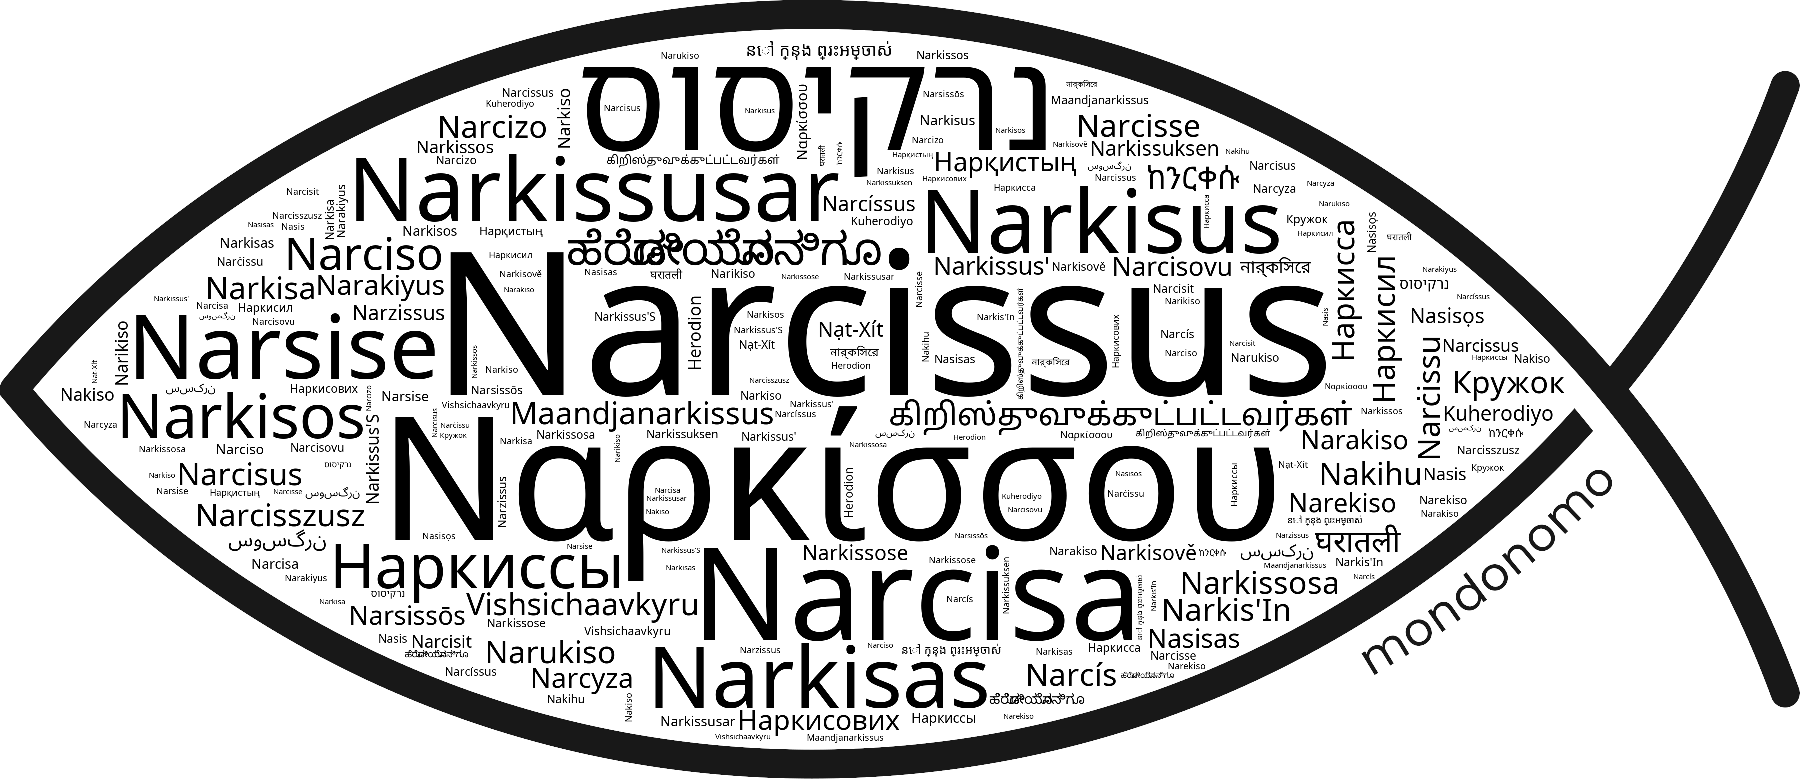 Name Narcissus in the world's Bibles